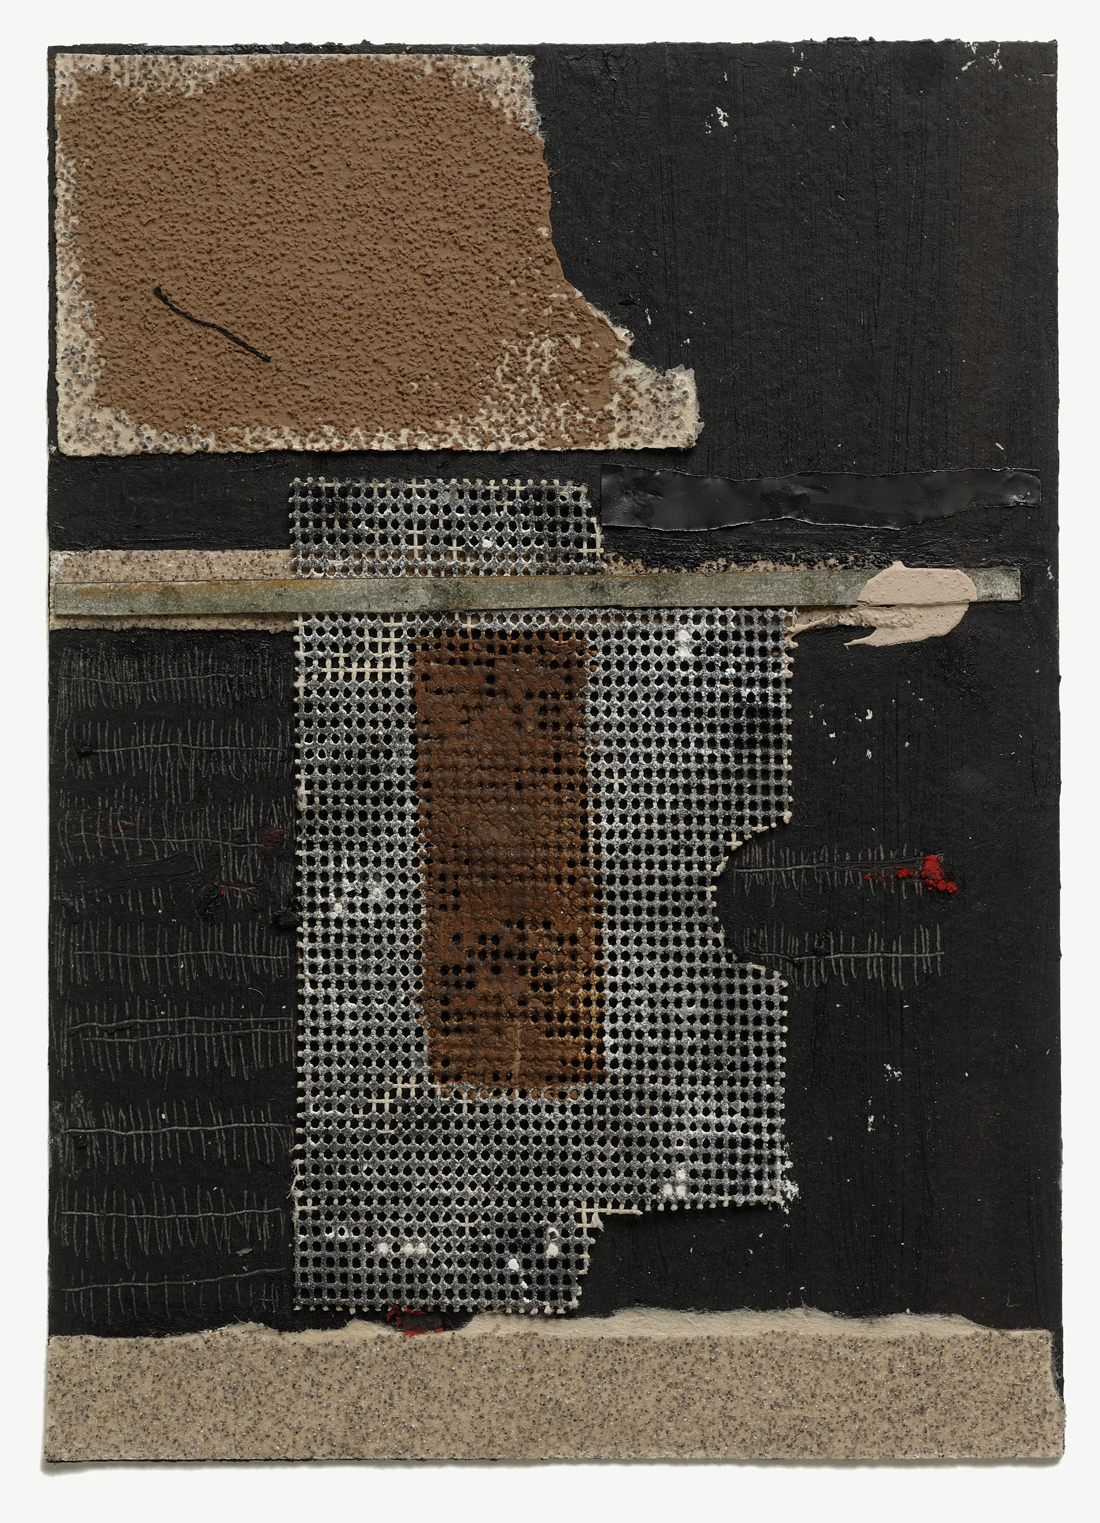 UNTITLED (TR613), 2014 mixed media on paper, 7 x 5 inches